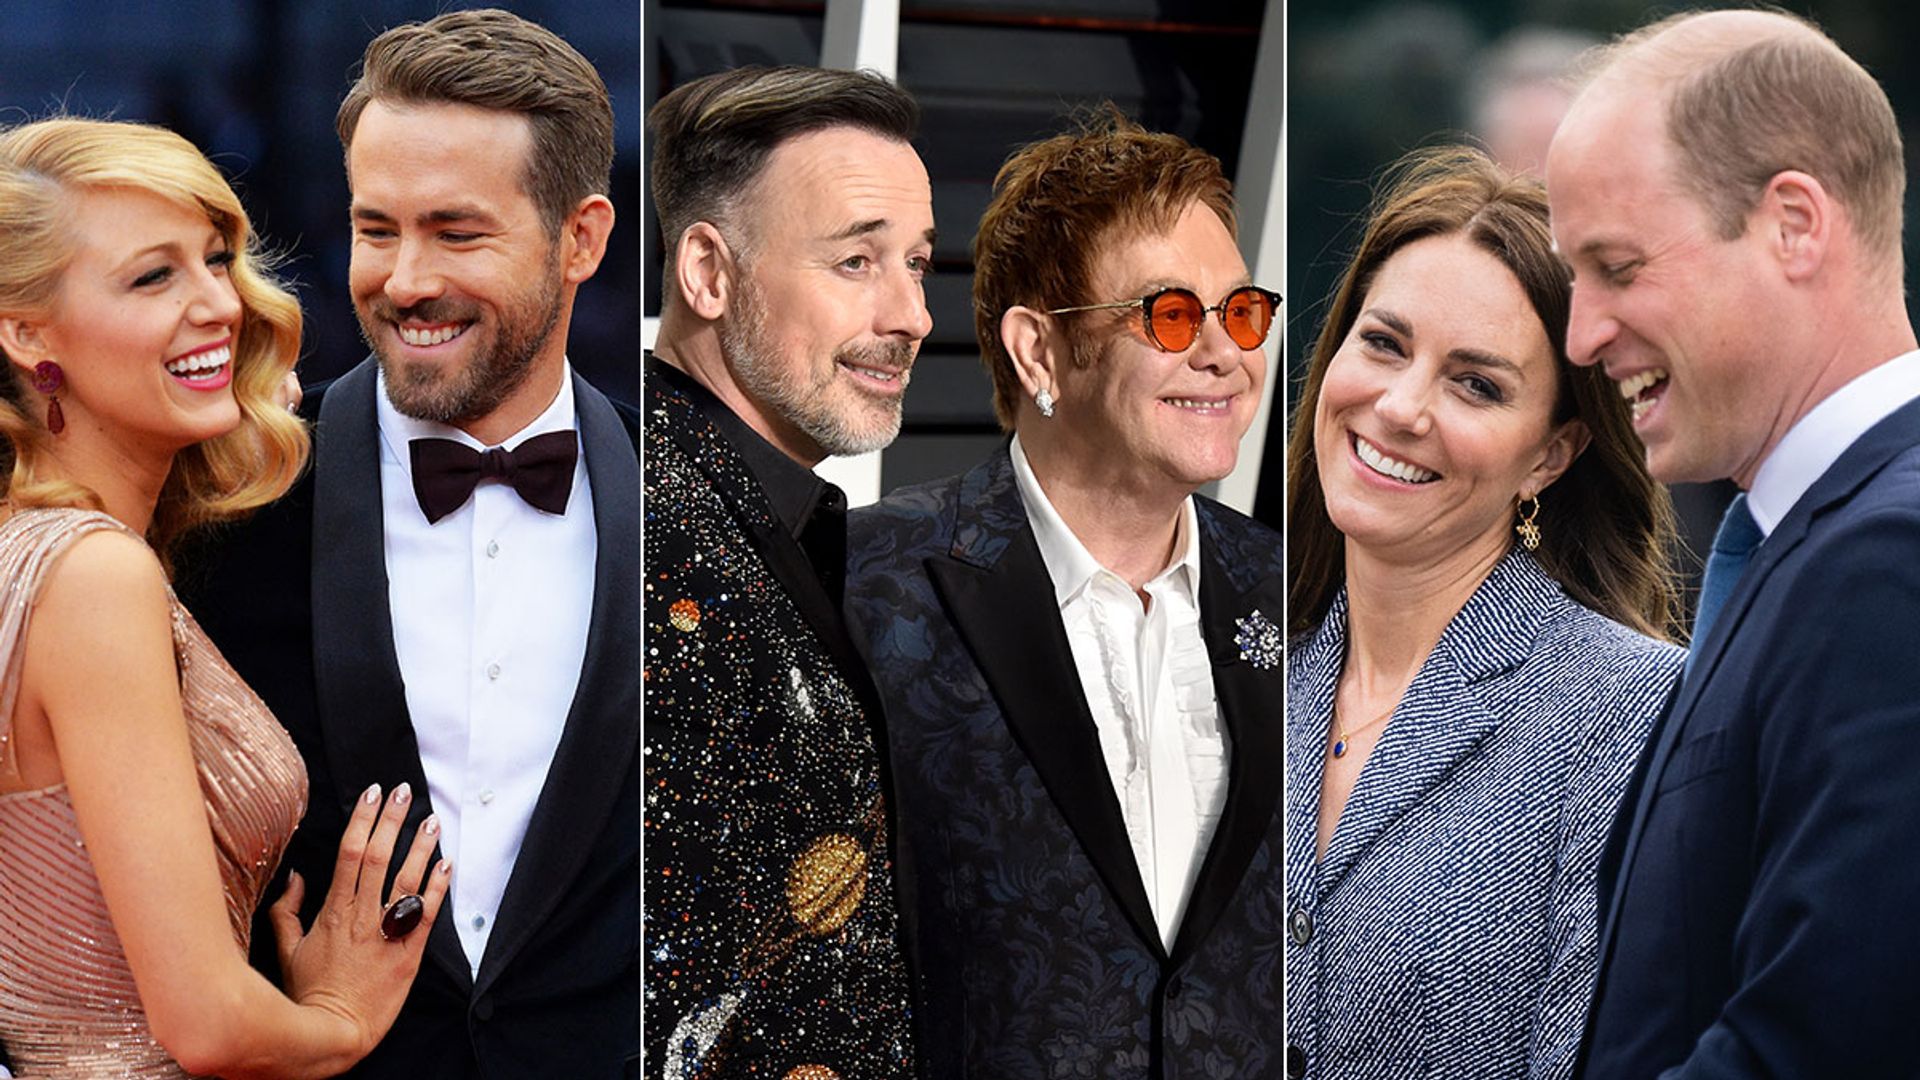 Iconic couples: Blake Lively and Ryan Reynolds, David Furnish and Elton John and Princess Kate and Prince William